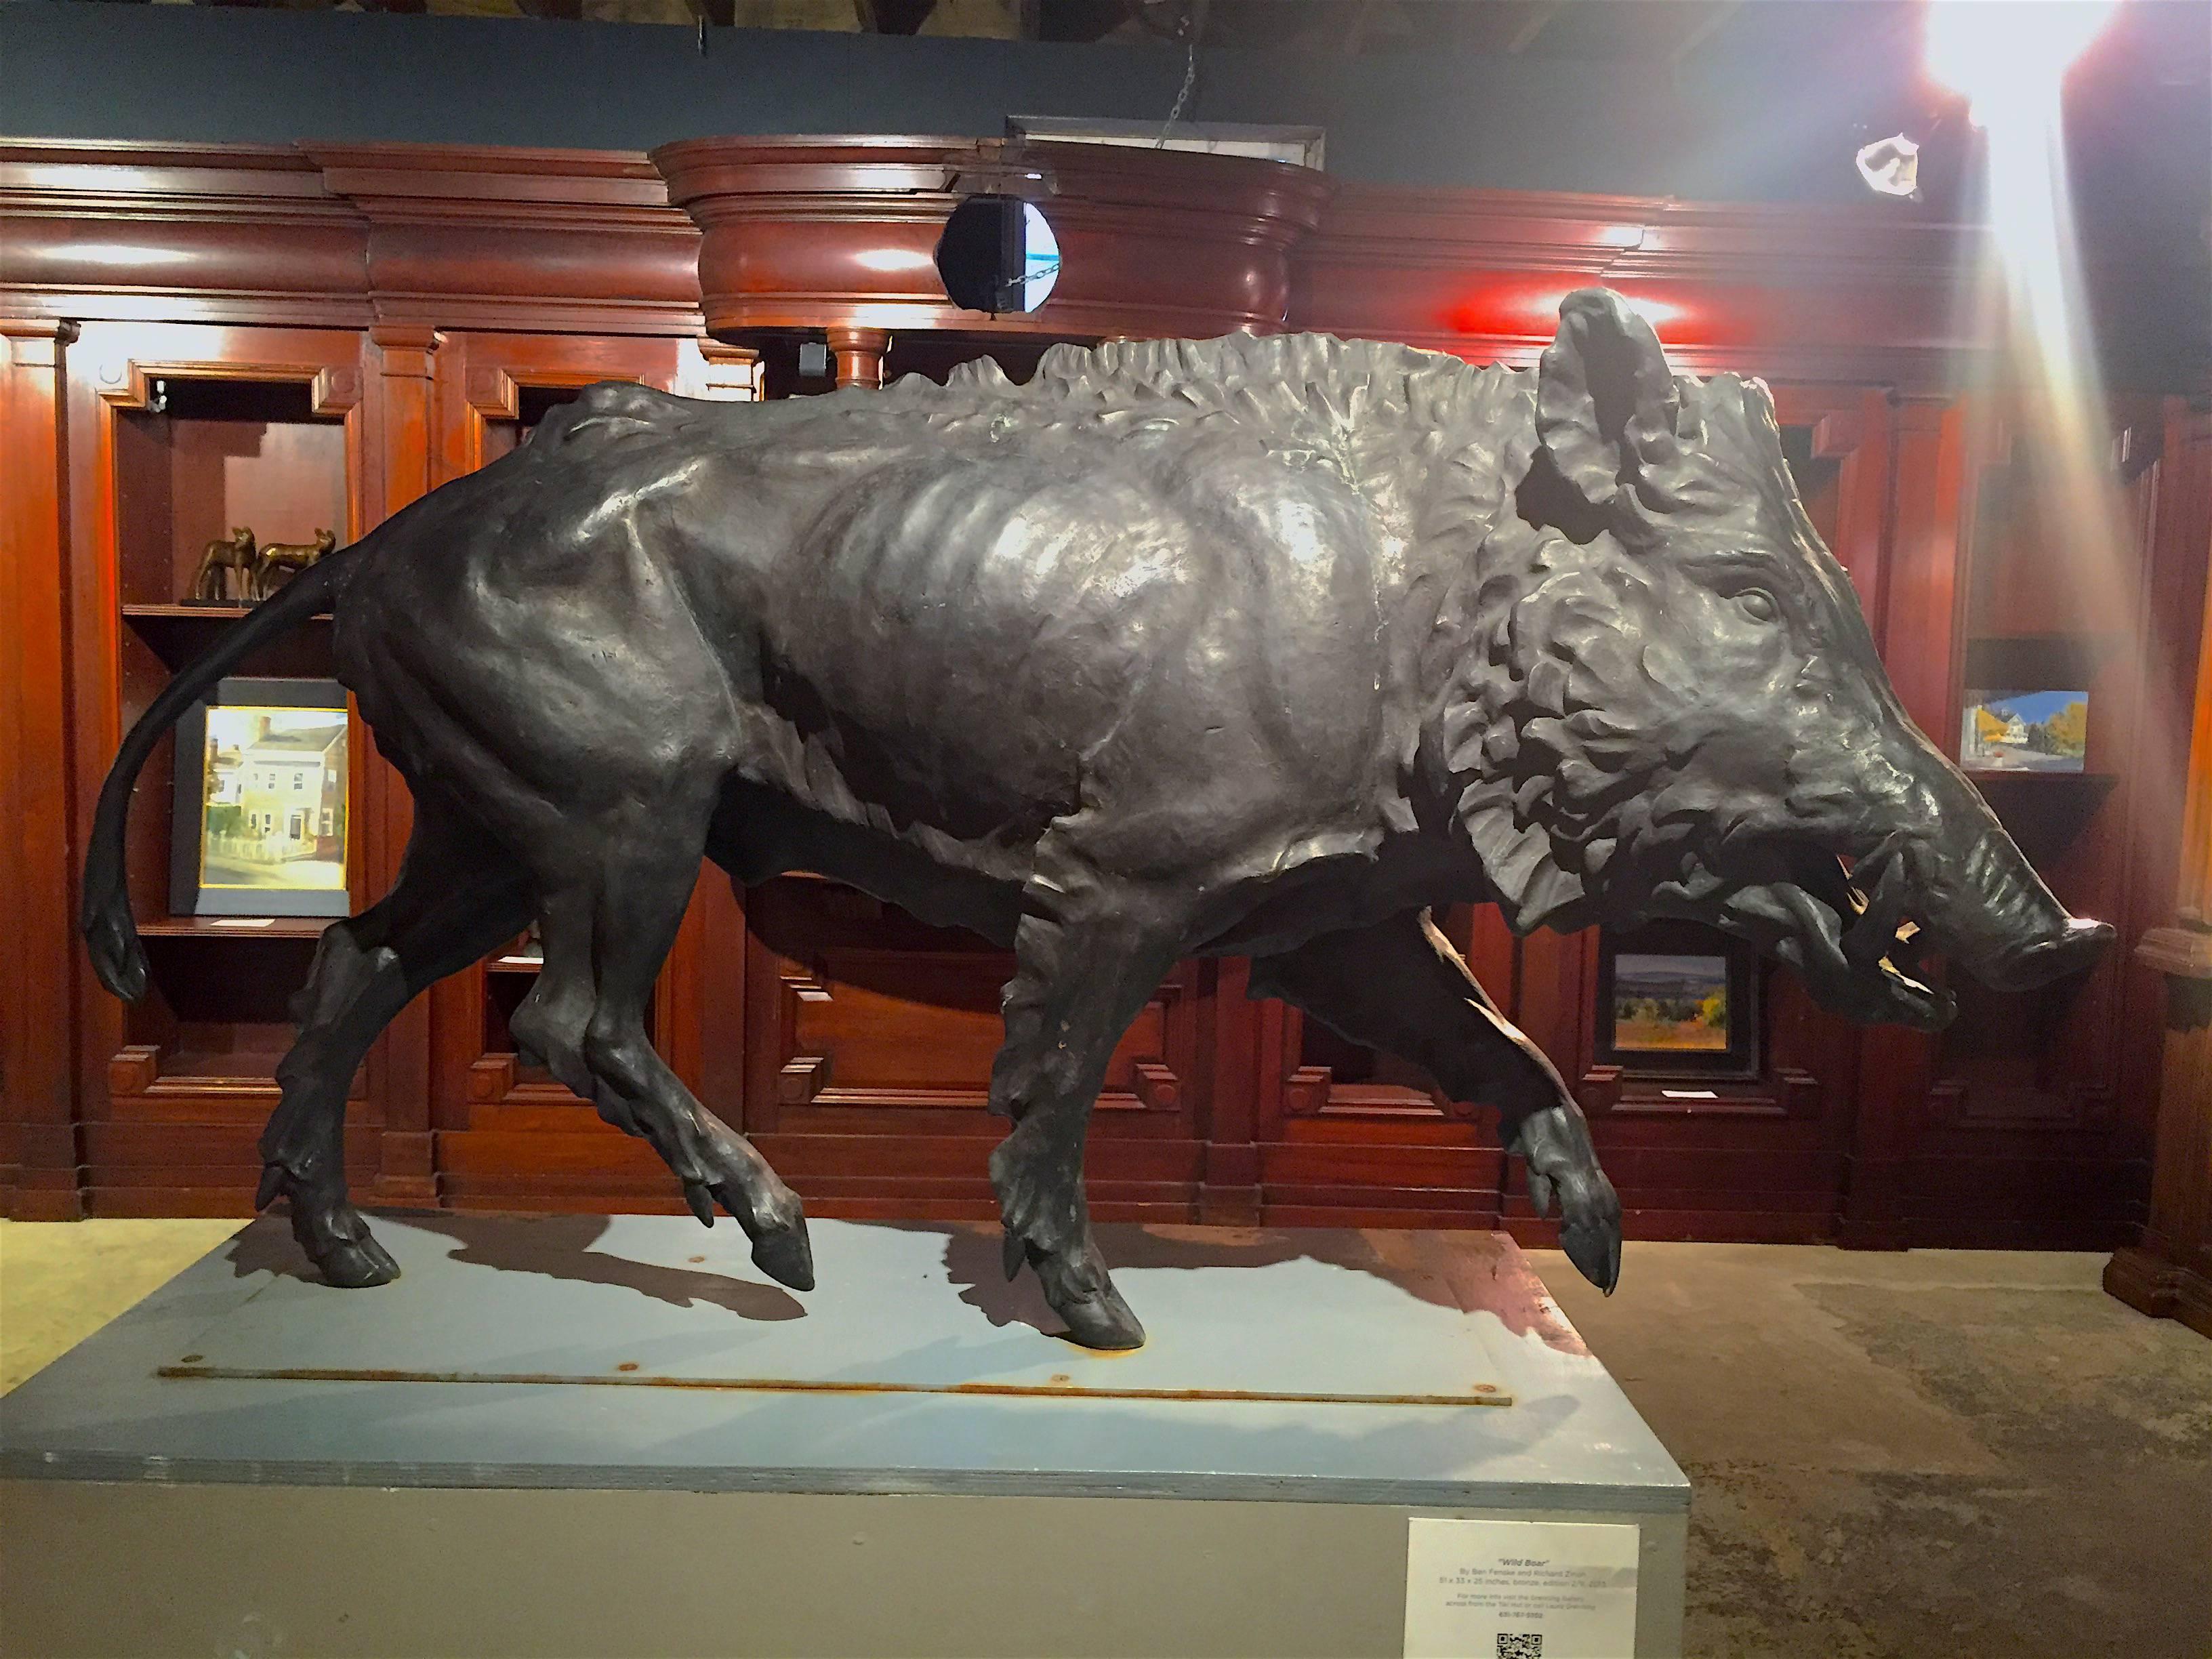 ‘Wild Boar’, the striking new bronze sculpture by Ben Fenske and Richard Zinon, vibrantly illustrates the ‘new’ Renaissance currently under way.

Ferocious yet graceful. 

Spawned by major advancements in communications, travel and life sciences of